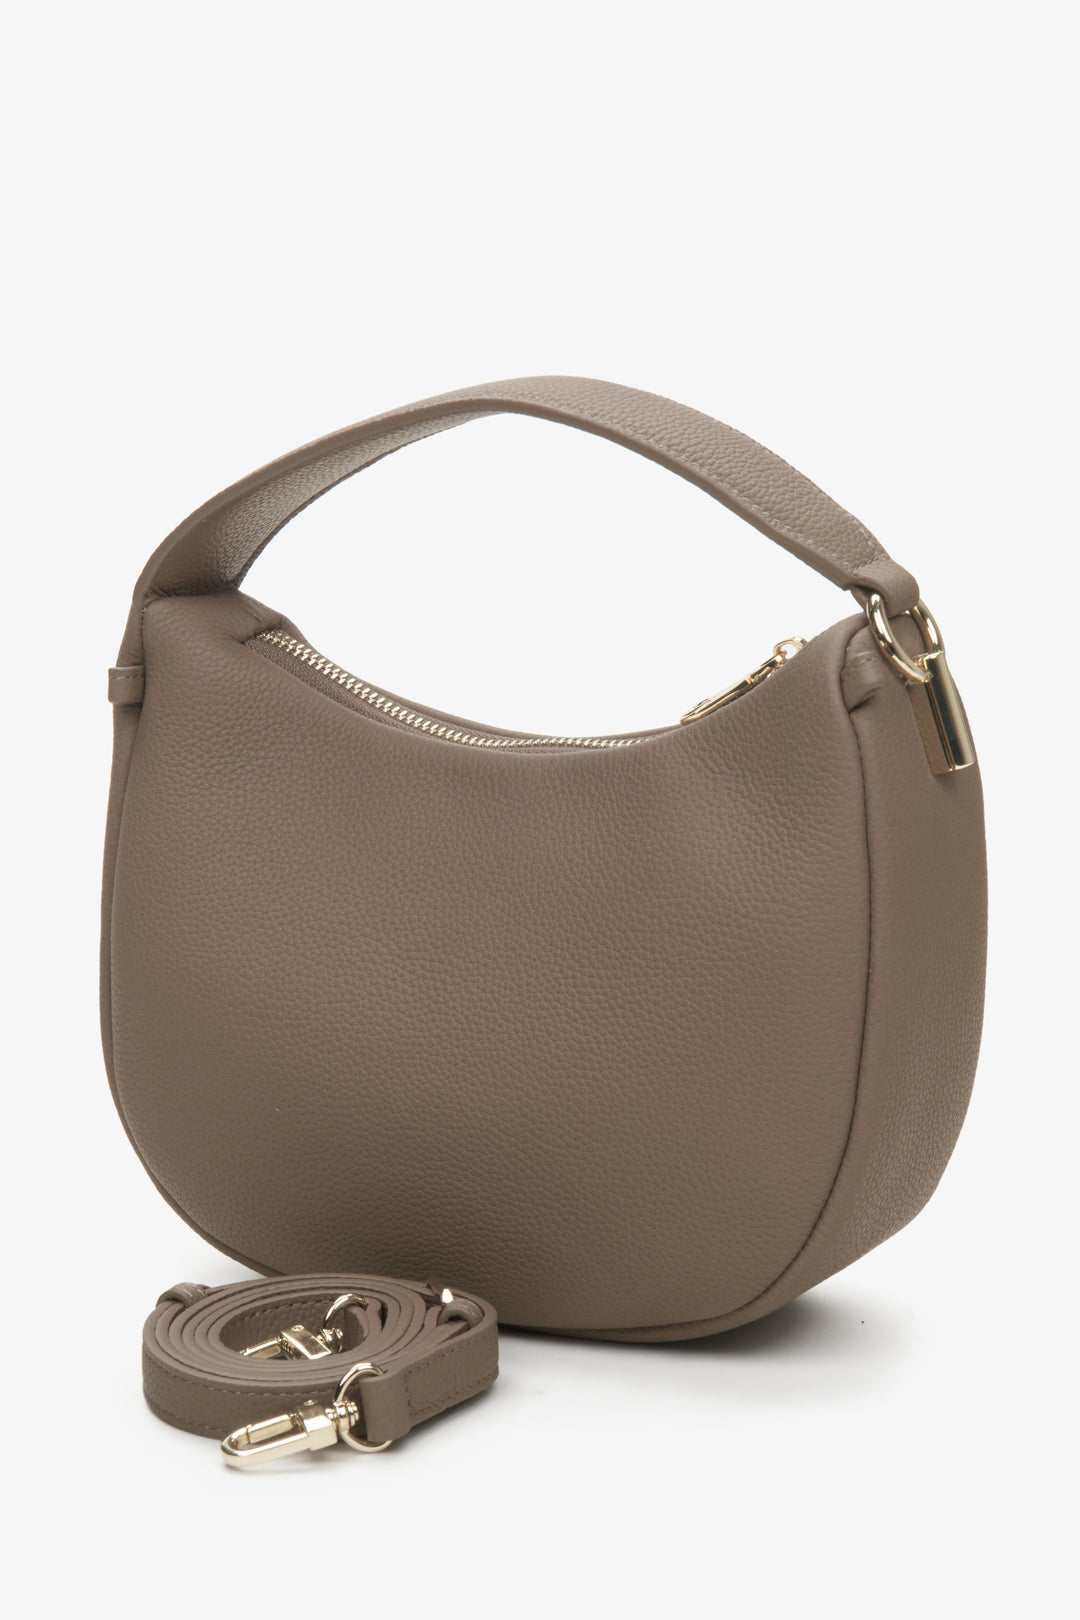  Leather women's crescent-shaped handbag by Estro in brown color.